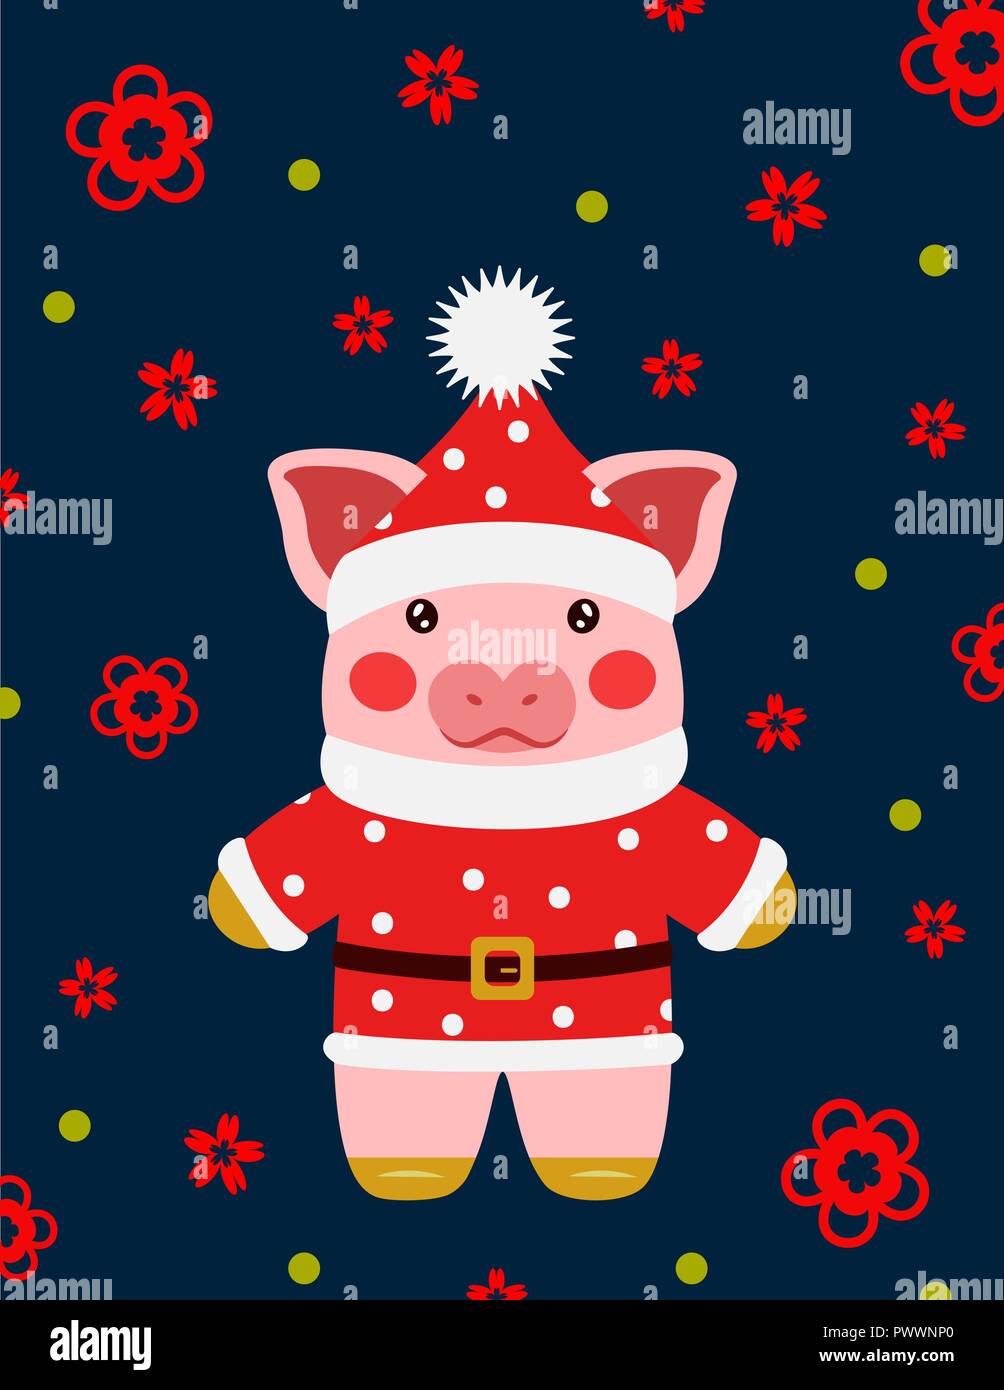 Happy new year cute pig Santa Claus postcard chinese. Symbol of the year 2019 vector illustrtion Stock Vector